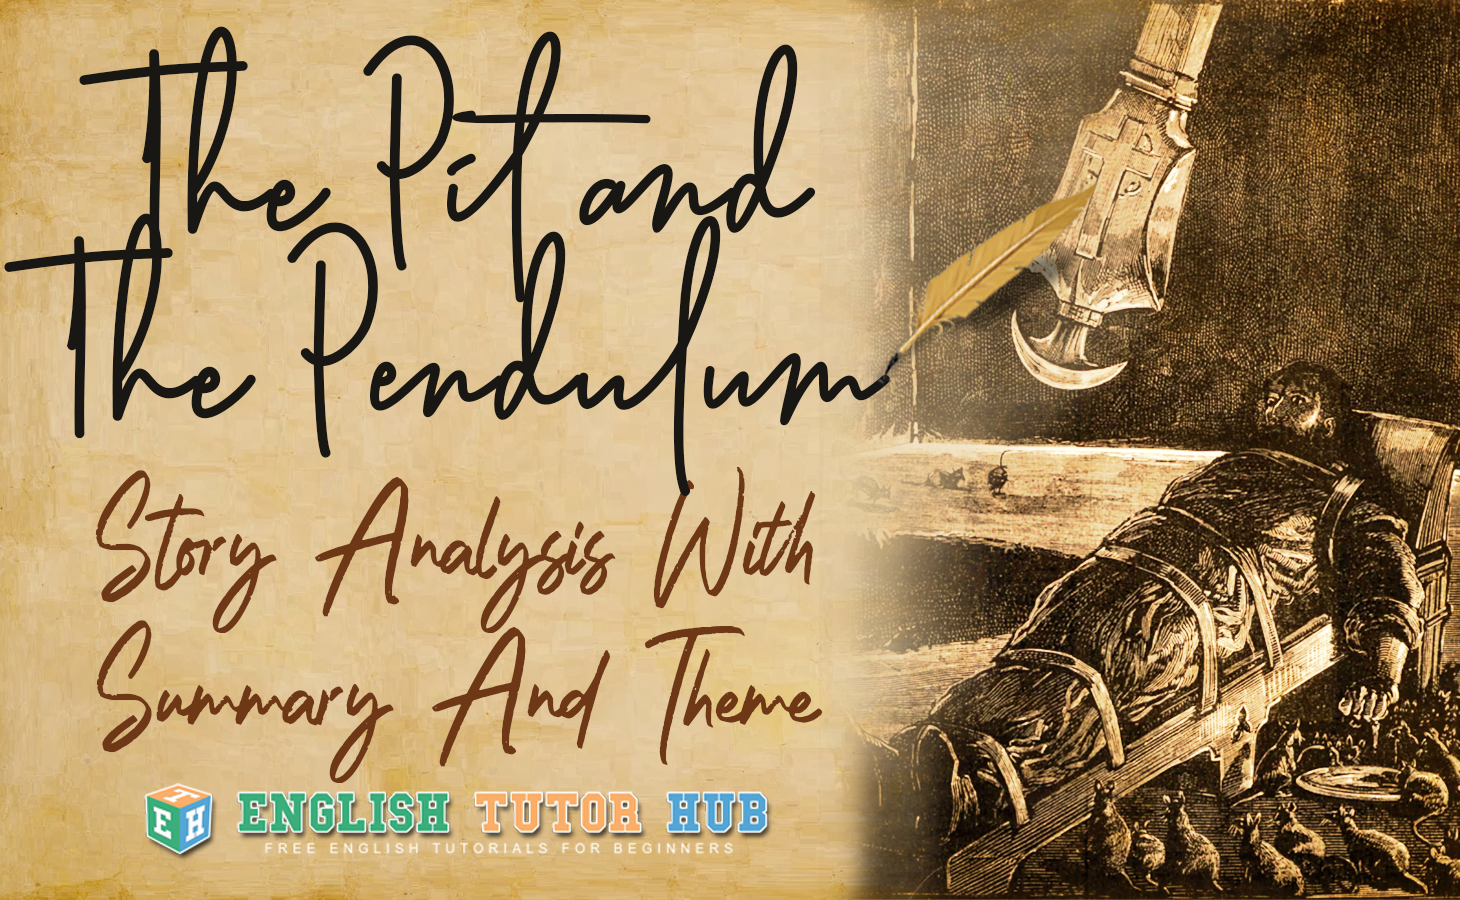 The Pit and The Pendulum Story Analysis, with Summary and Theme